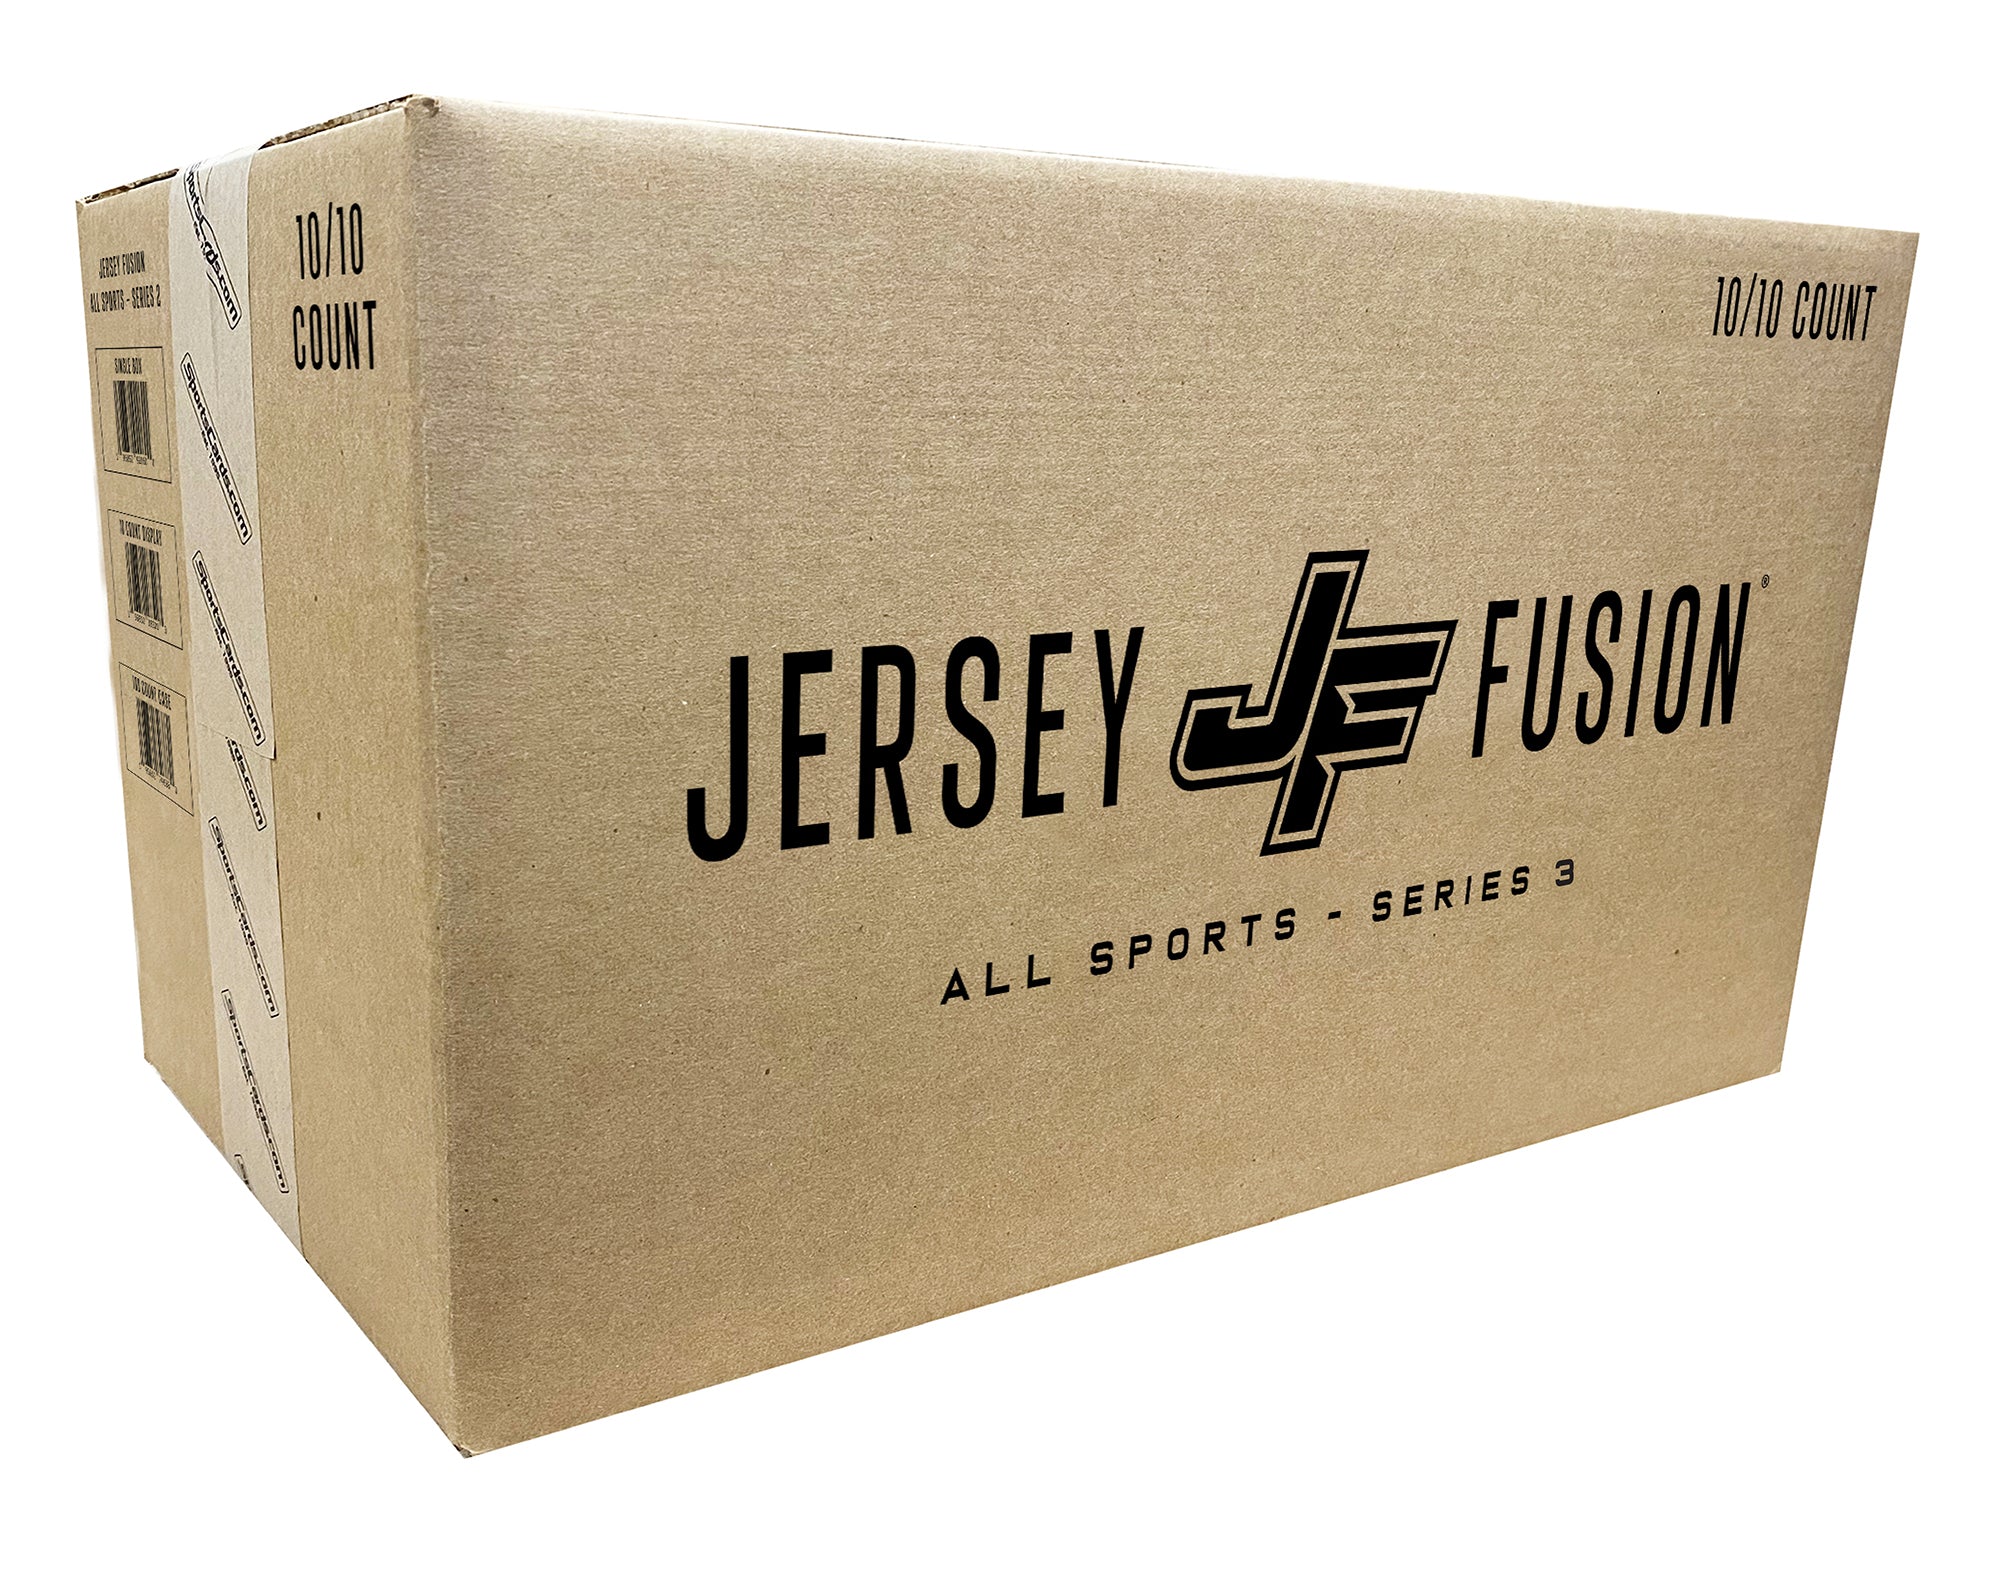 Jersey Fusion Products